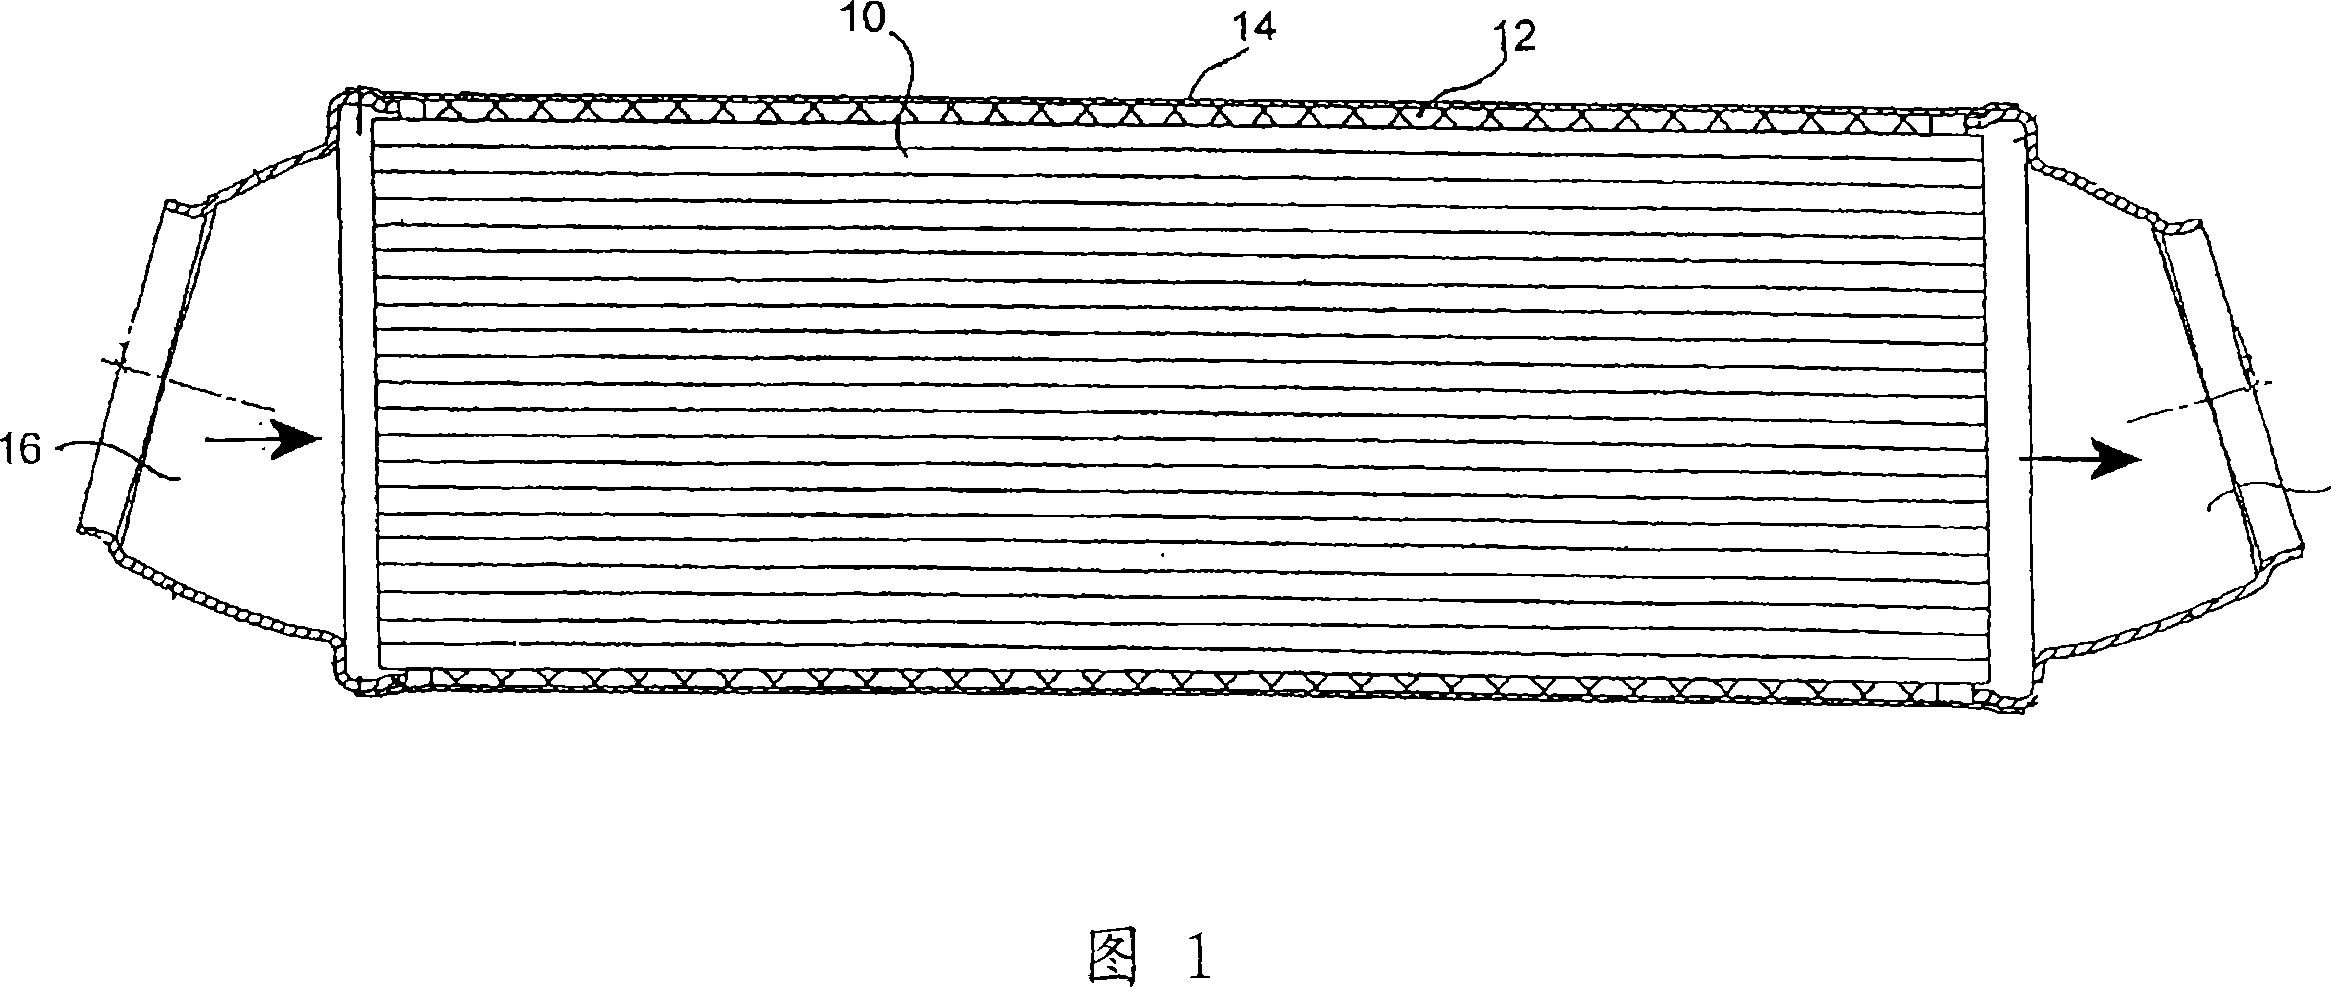 Method of producing exhaust-gas carrying devices, in particular exhaust-gas cleaning devices